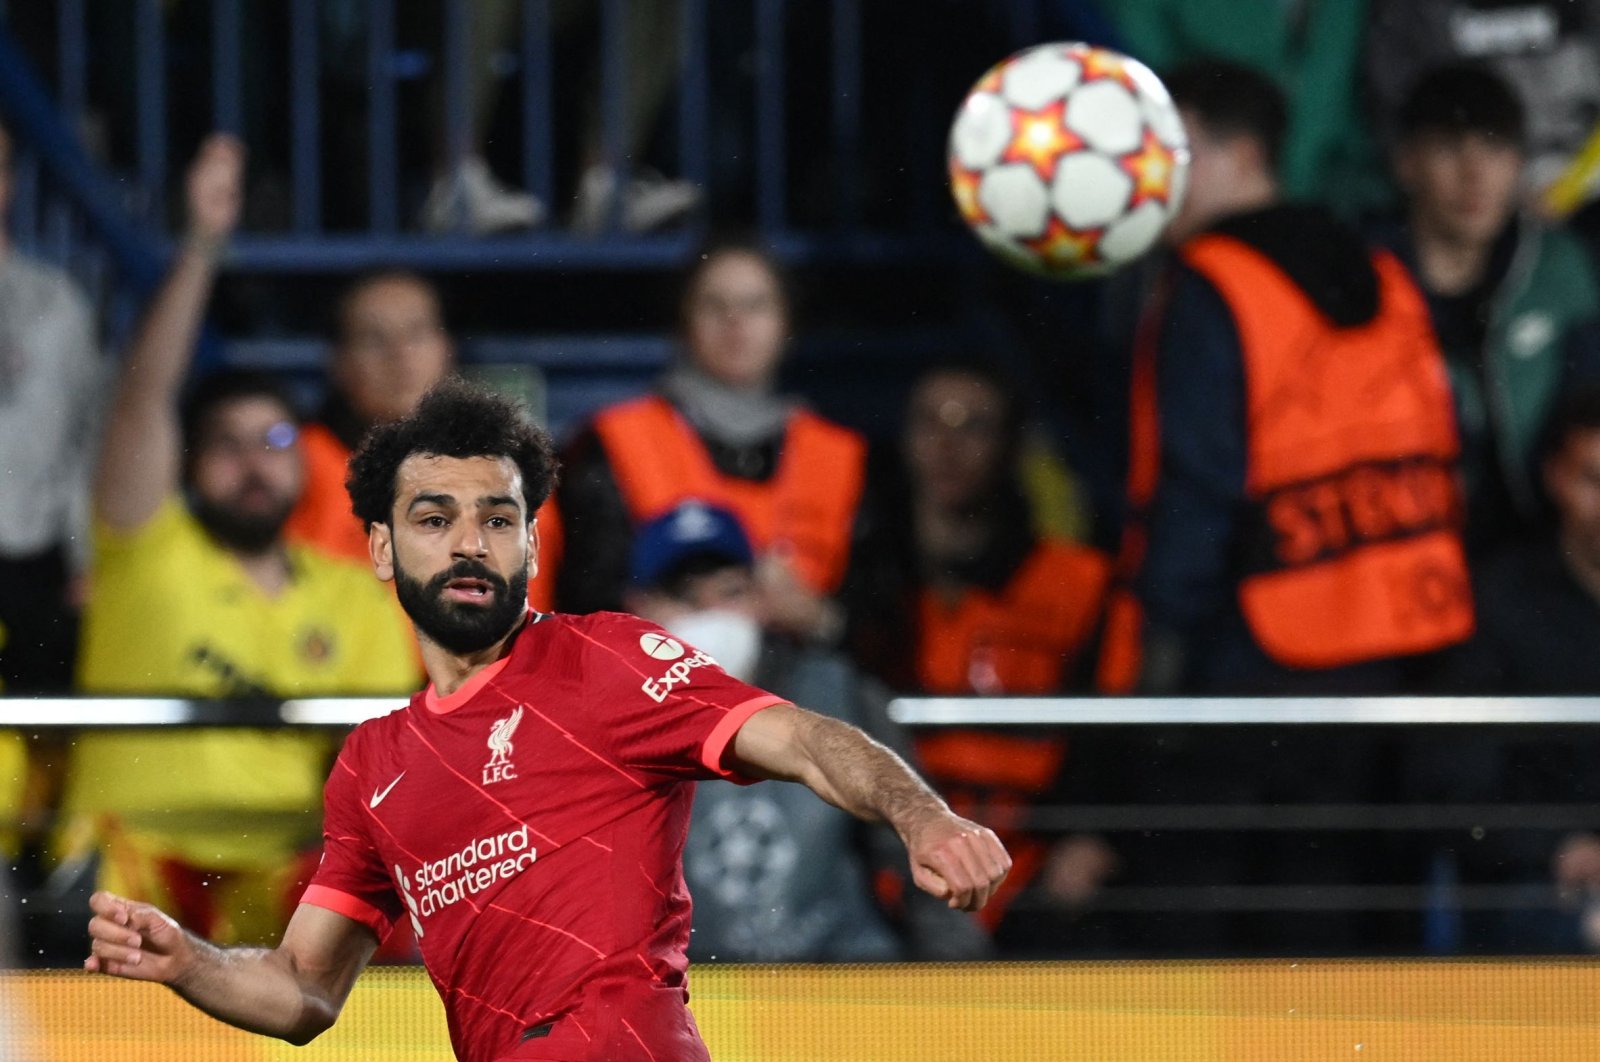 Liverpool&#039;s Mohamed Salah eyes the ball during the UEFA Champions League semifinal second-leg match against Villarreal, Vila-real, Spain, May 3, 2022. (AFP Photo)